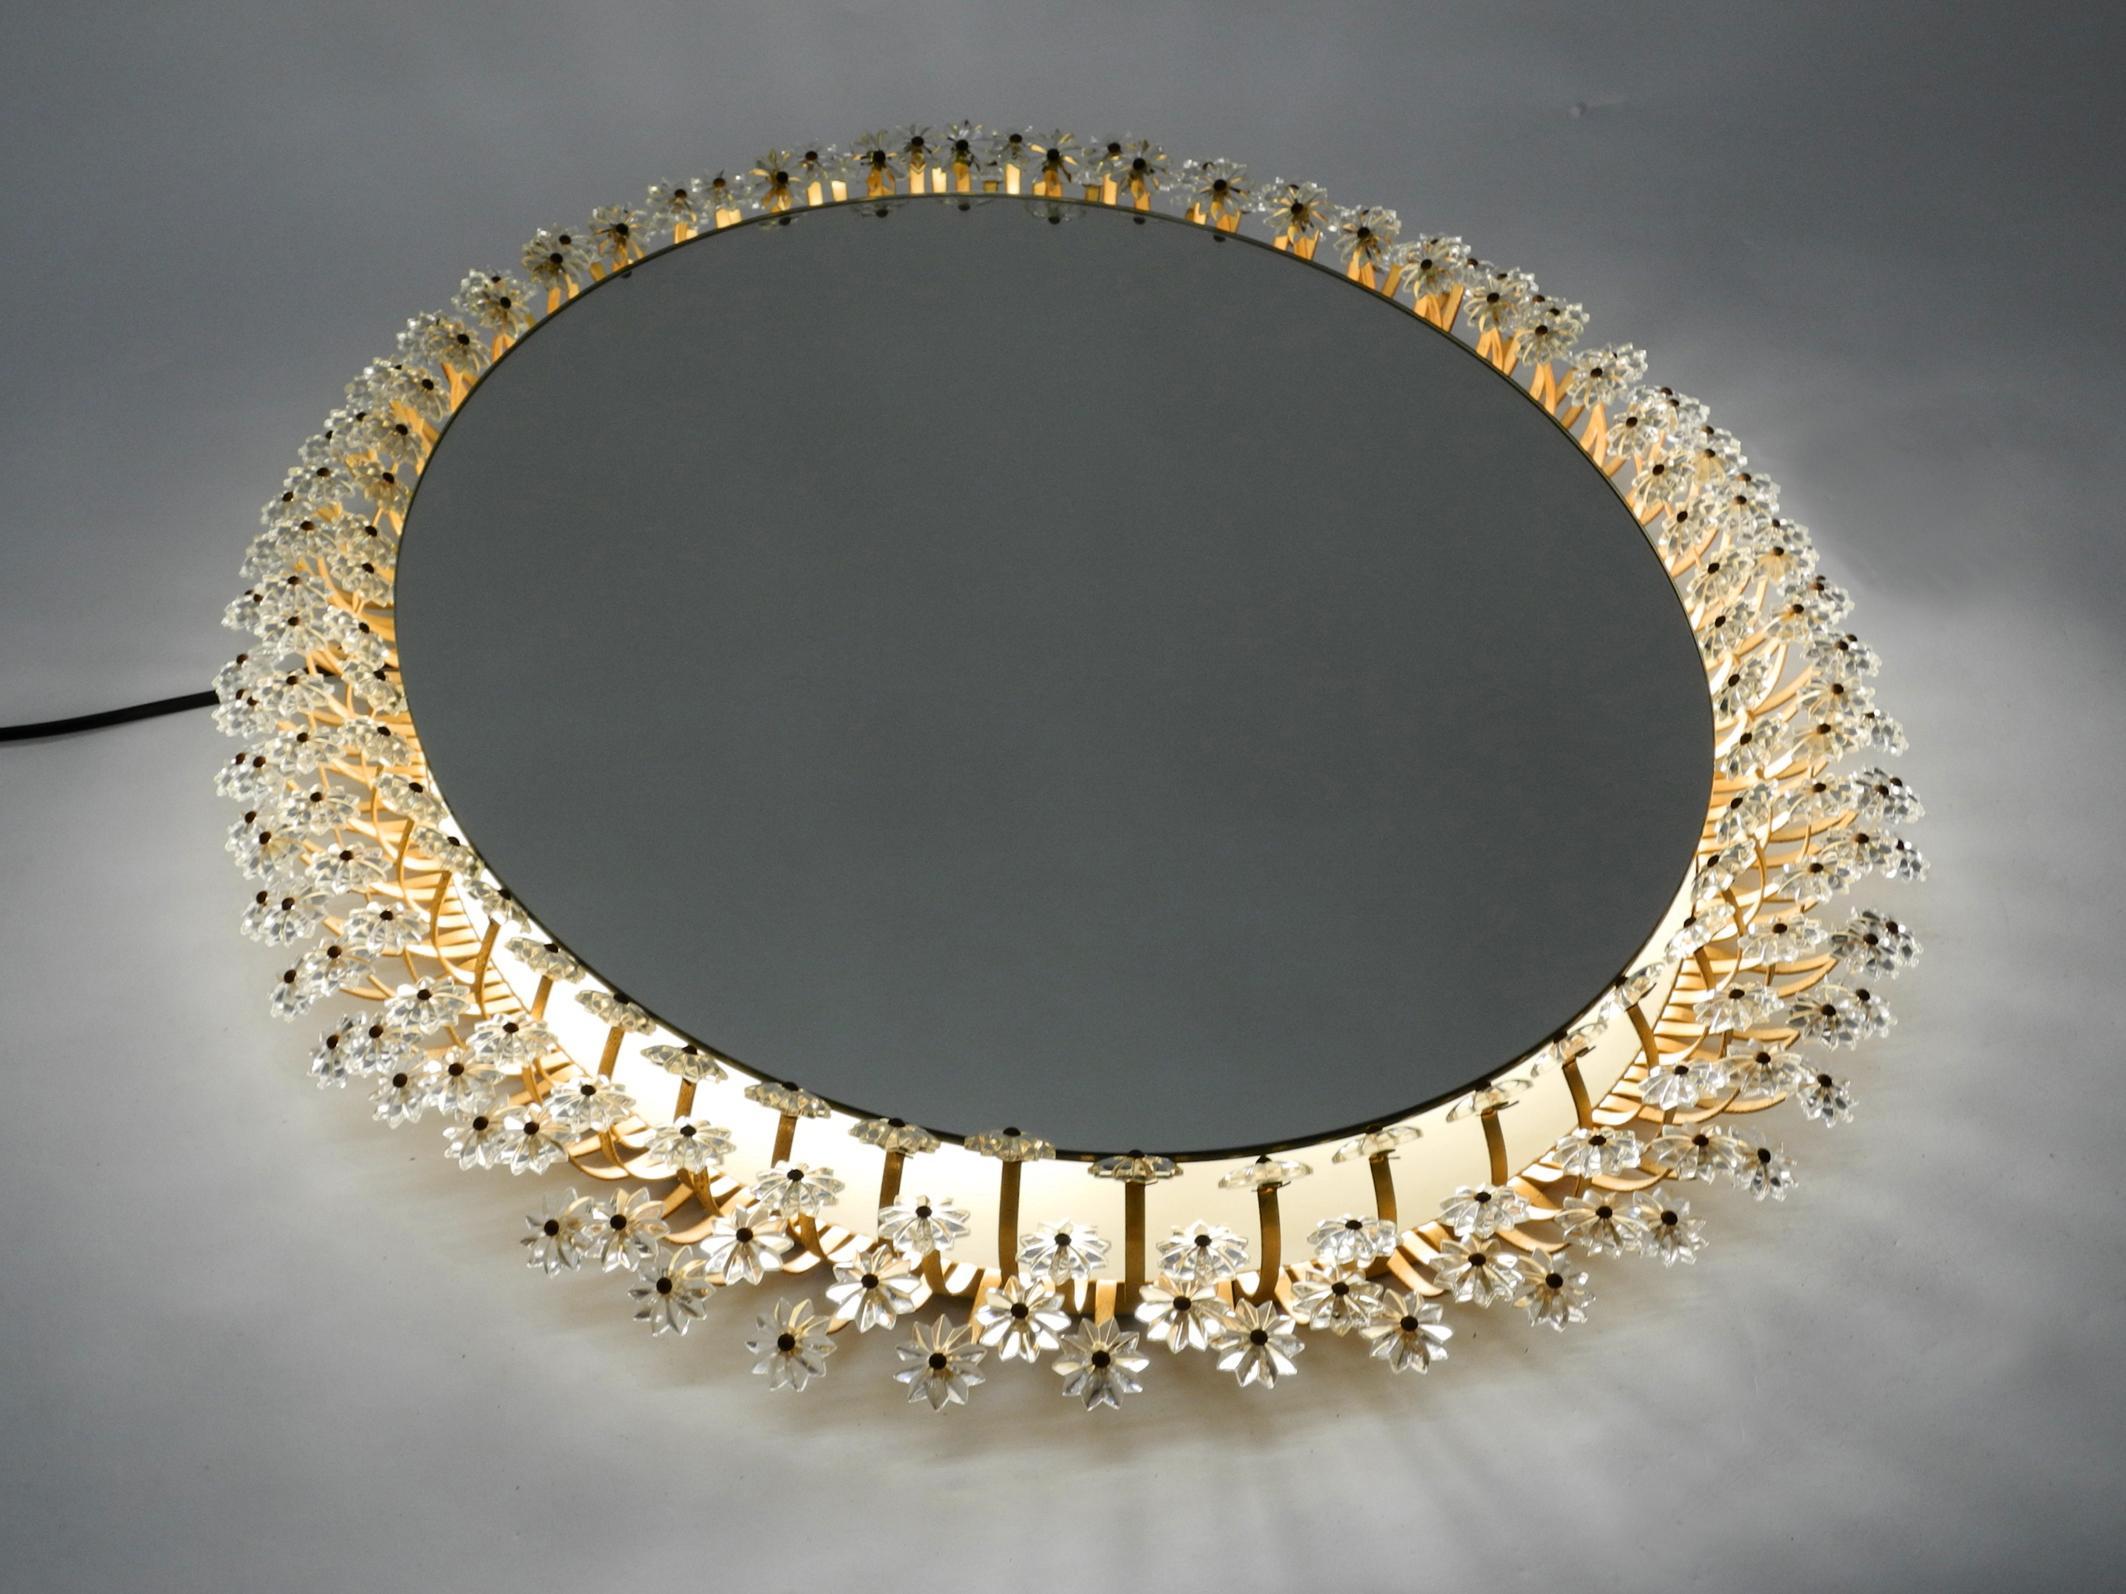 Large Oval 50s Illuminated Flower Mirror by Schöninger with a Gold-Colored Frame 6